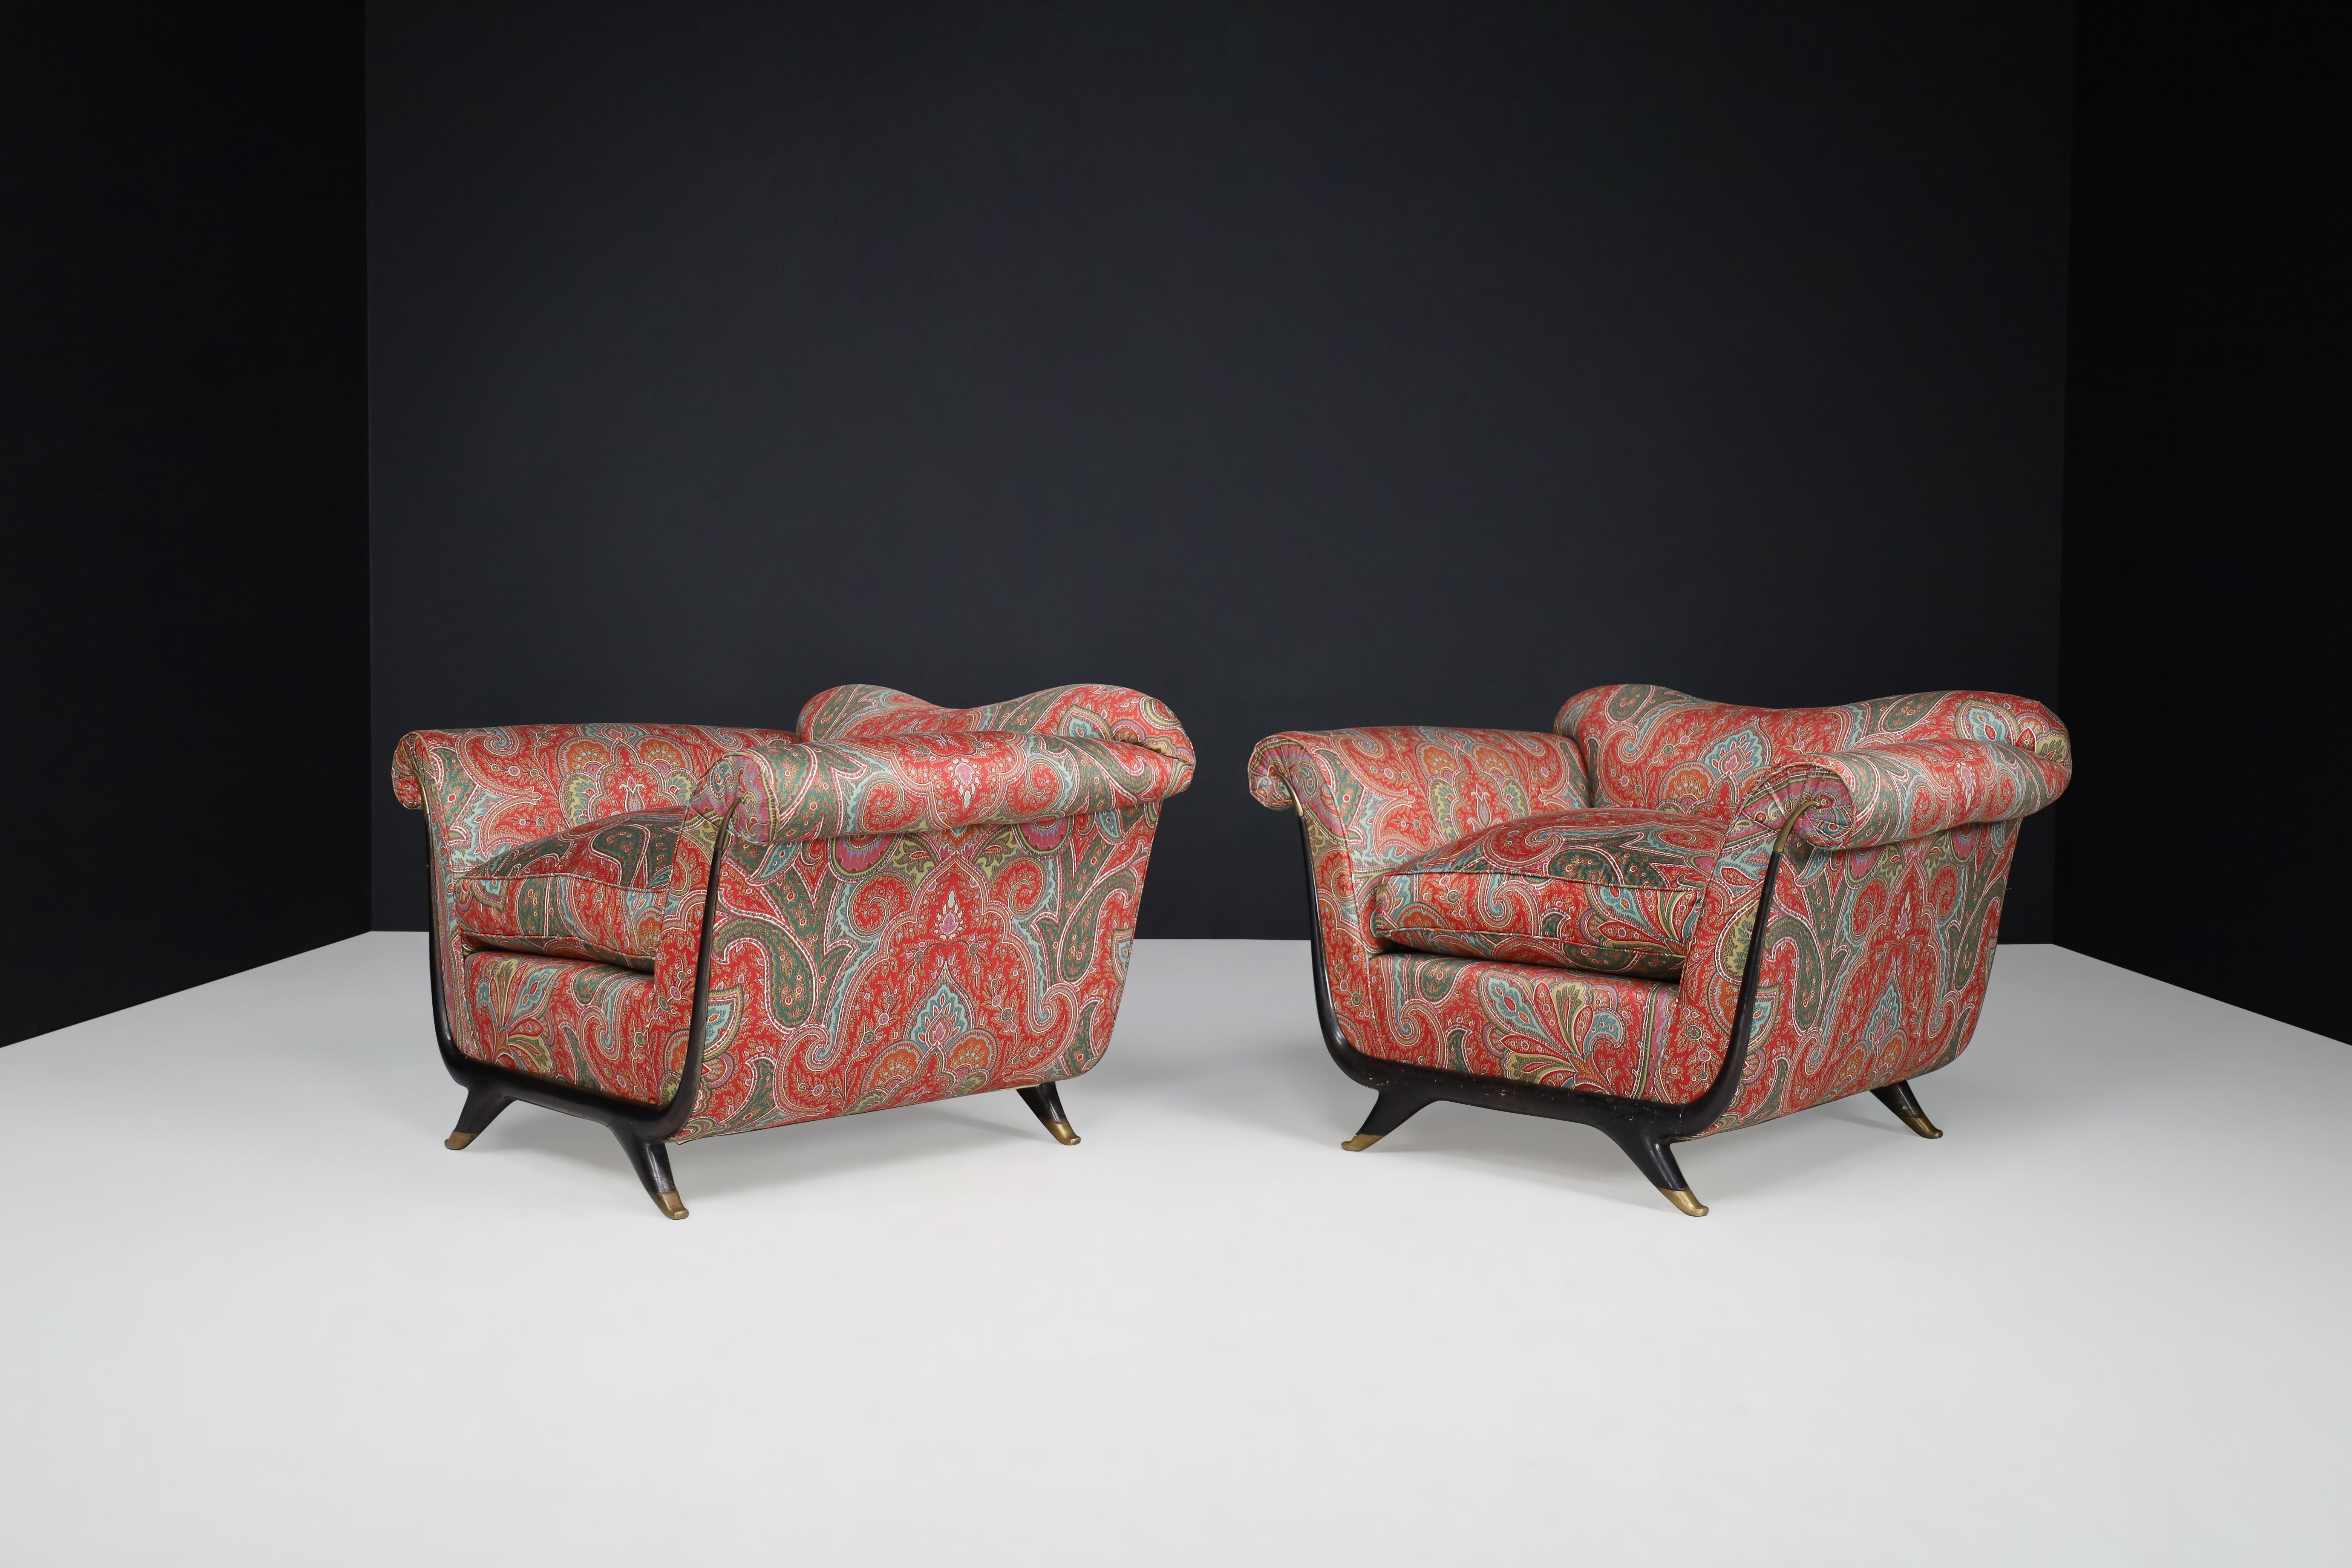 Guglielmo Ulrich Lounge Chairs in Walnut, Fabric, and Brass, Italy, 1930s  For Sale 3